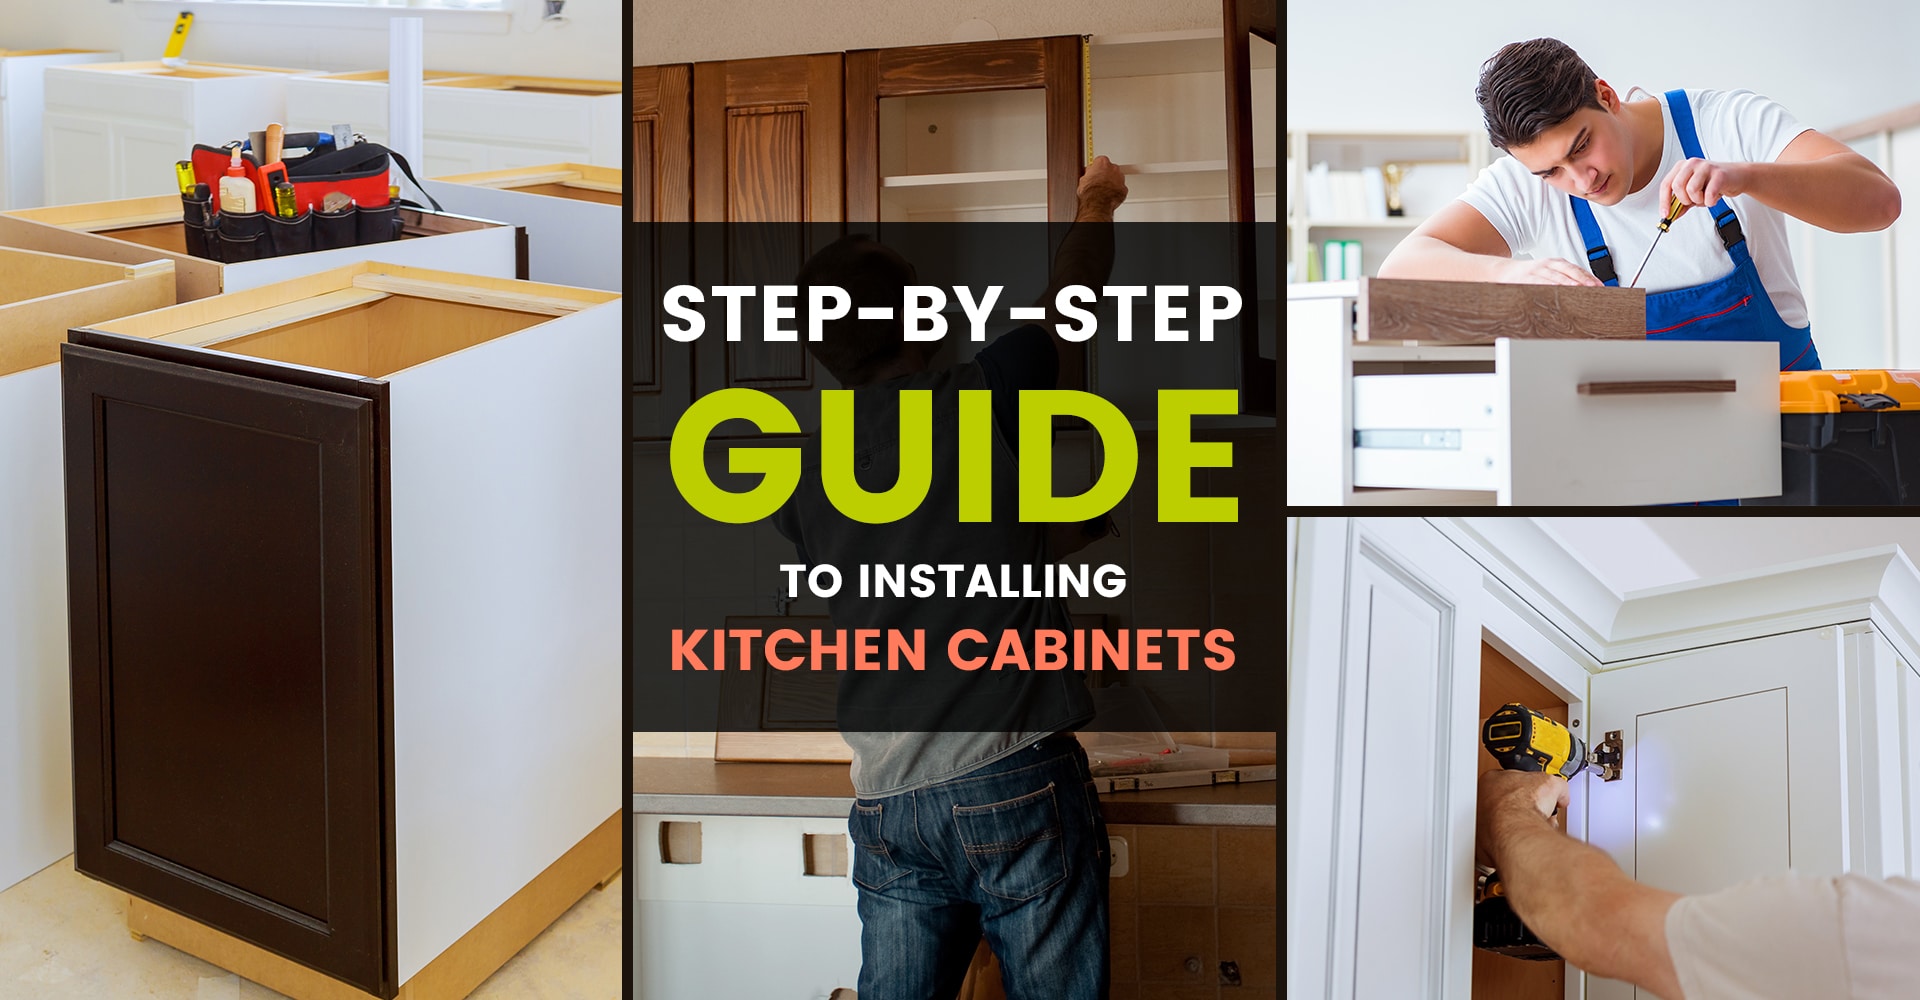 Step-By-Step Guide To Installing Kitchen Cabinets (DIY) - CabinetCorp